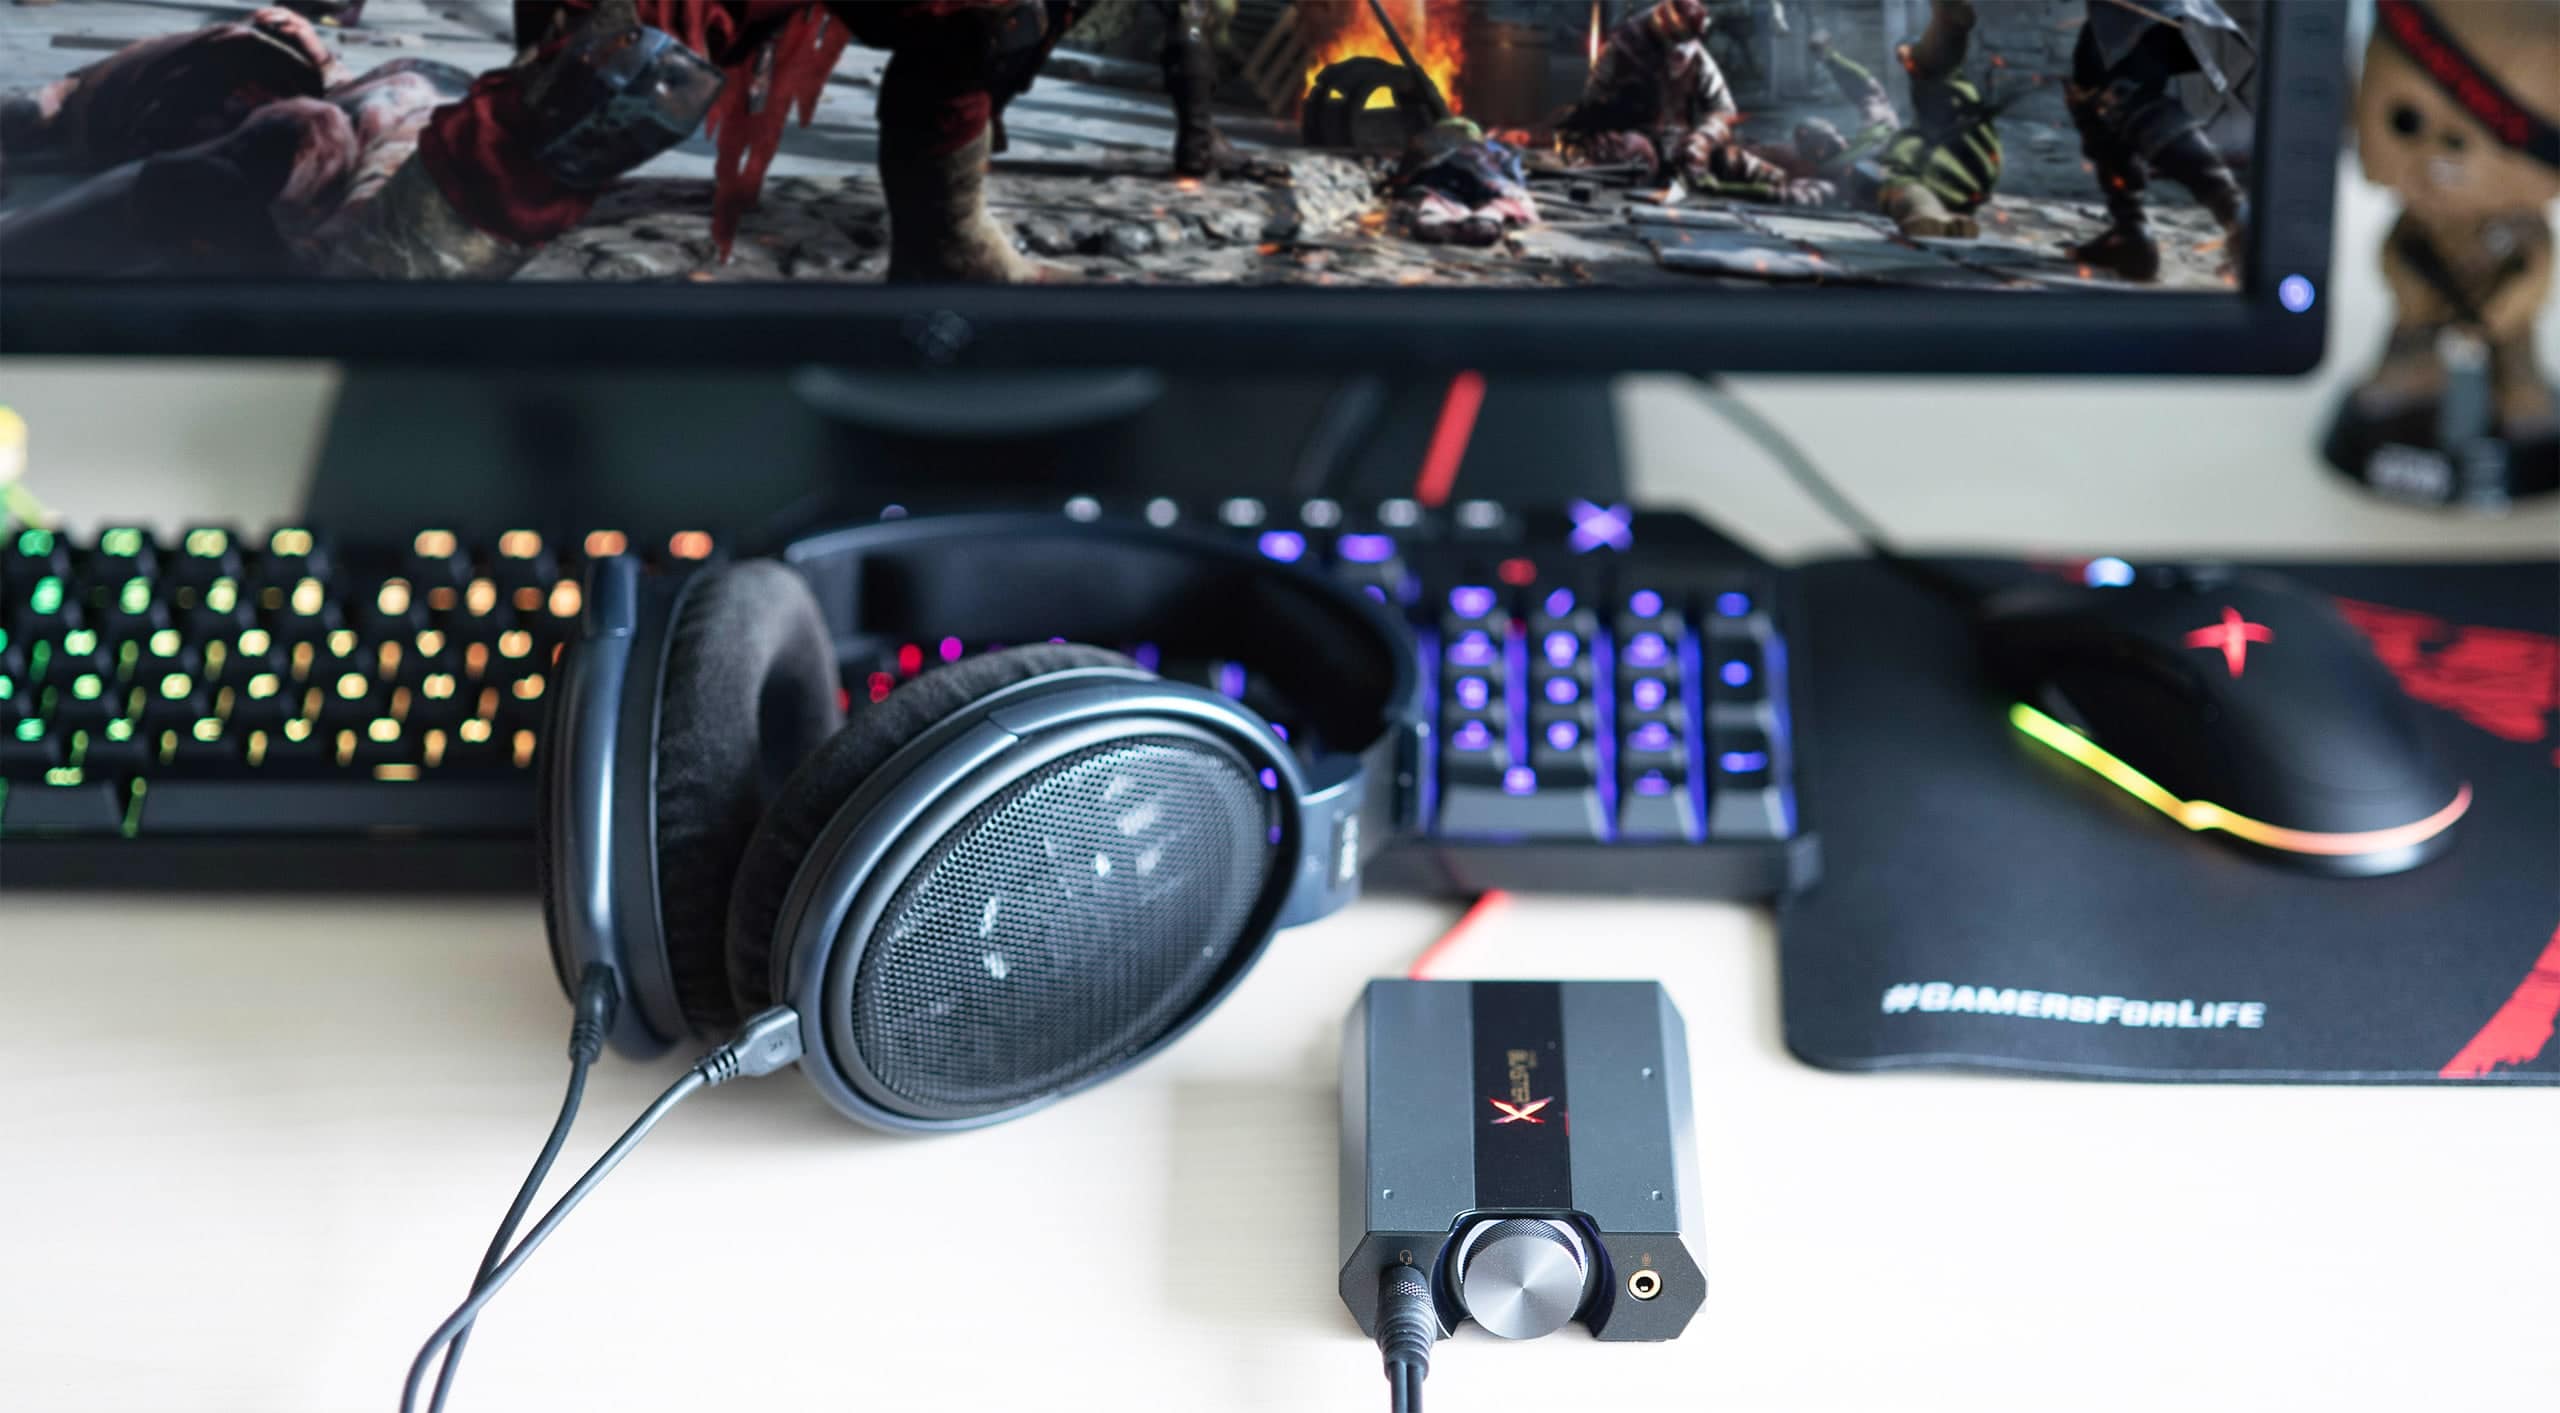 Creative Sound Blasterx G6 Review Comparison Vs Fiio K5 Pro Two Multi Input Dacs Perfect For Consoles And Pc Gaming Mighty Gadget Blog Uk Technology News And Reviews